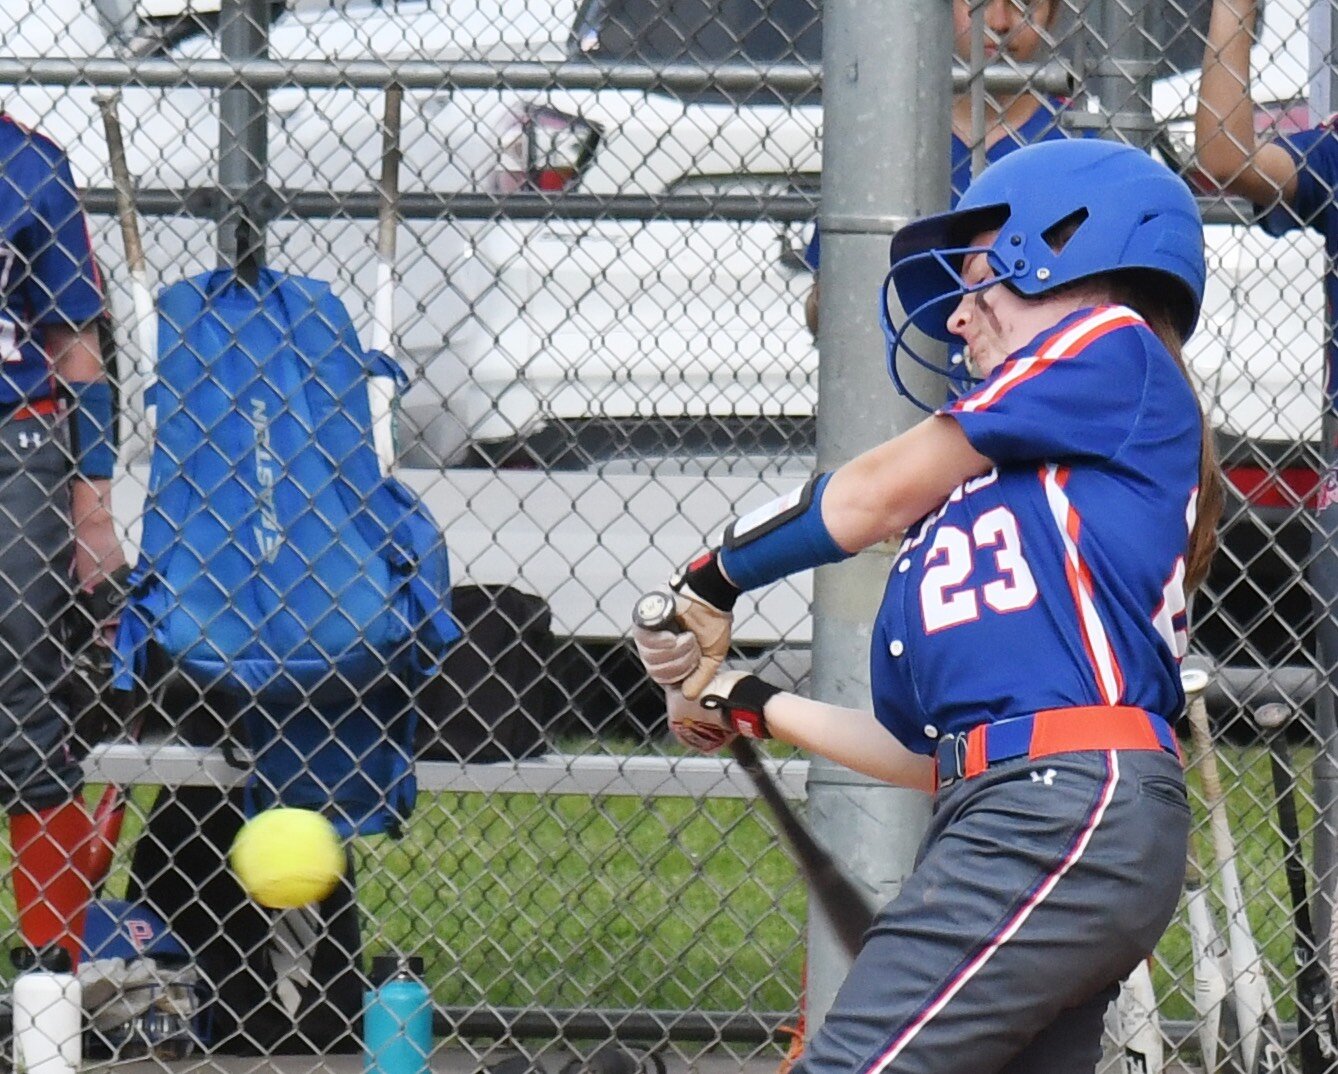 Poland's McKenzie Parow connects with a pitch Friday against Oriskany.